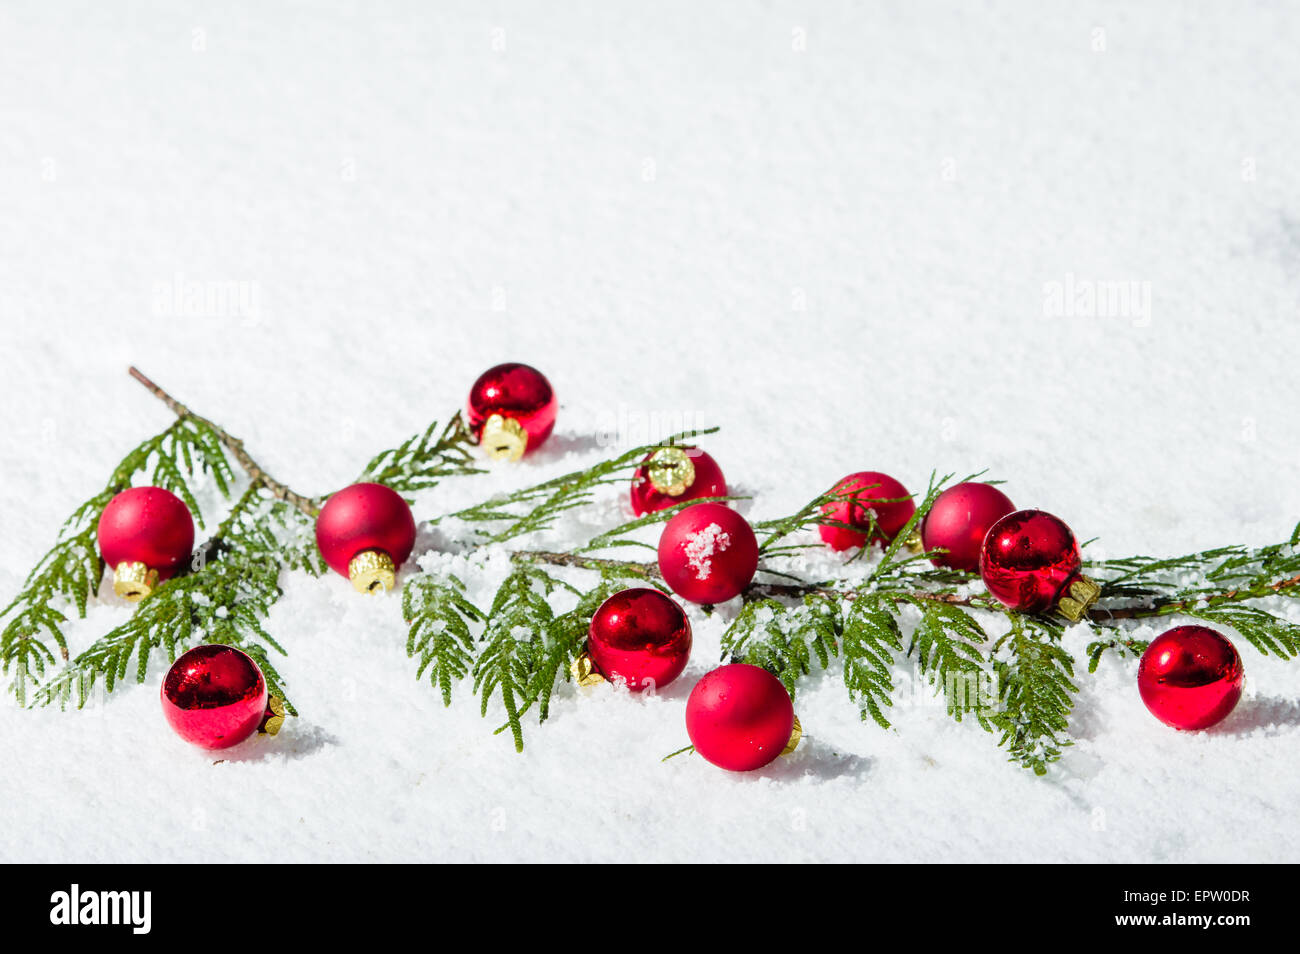 Evergreen bough in the snow with red Christmas ornaments Stock Photo